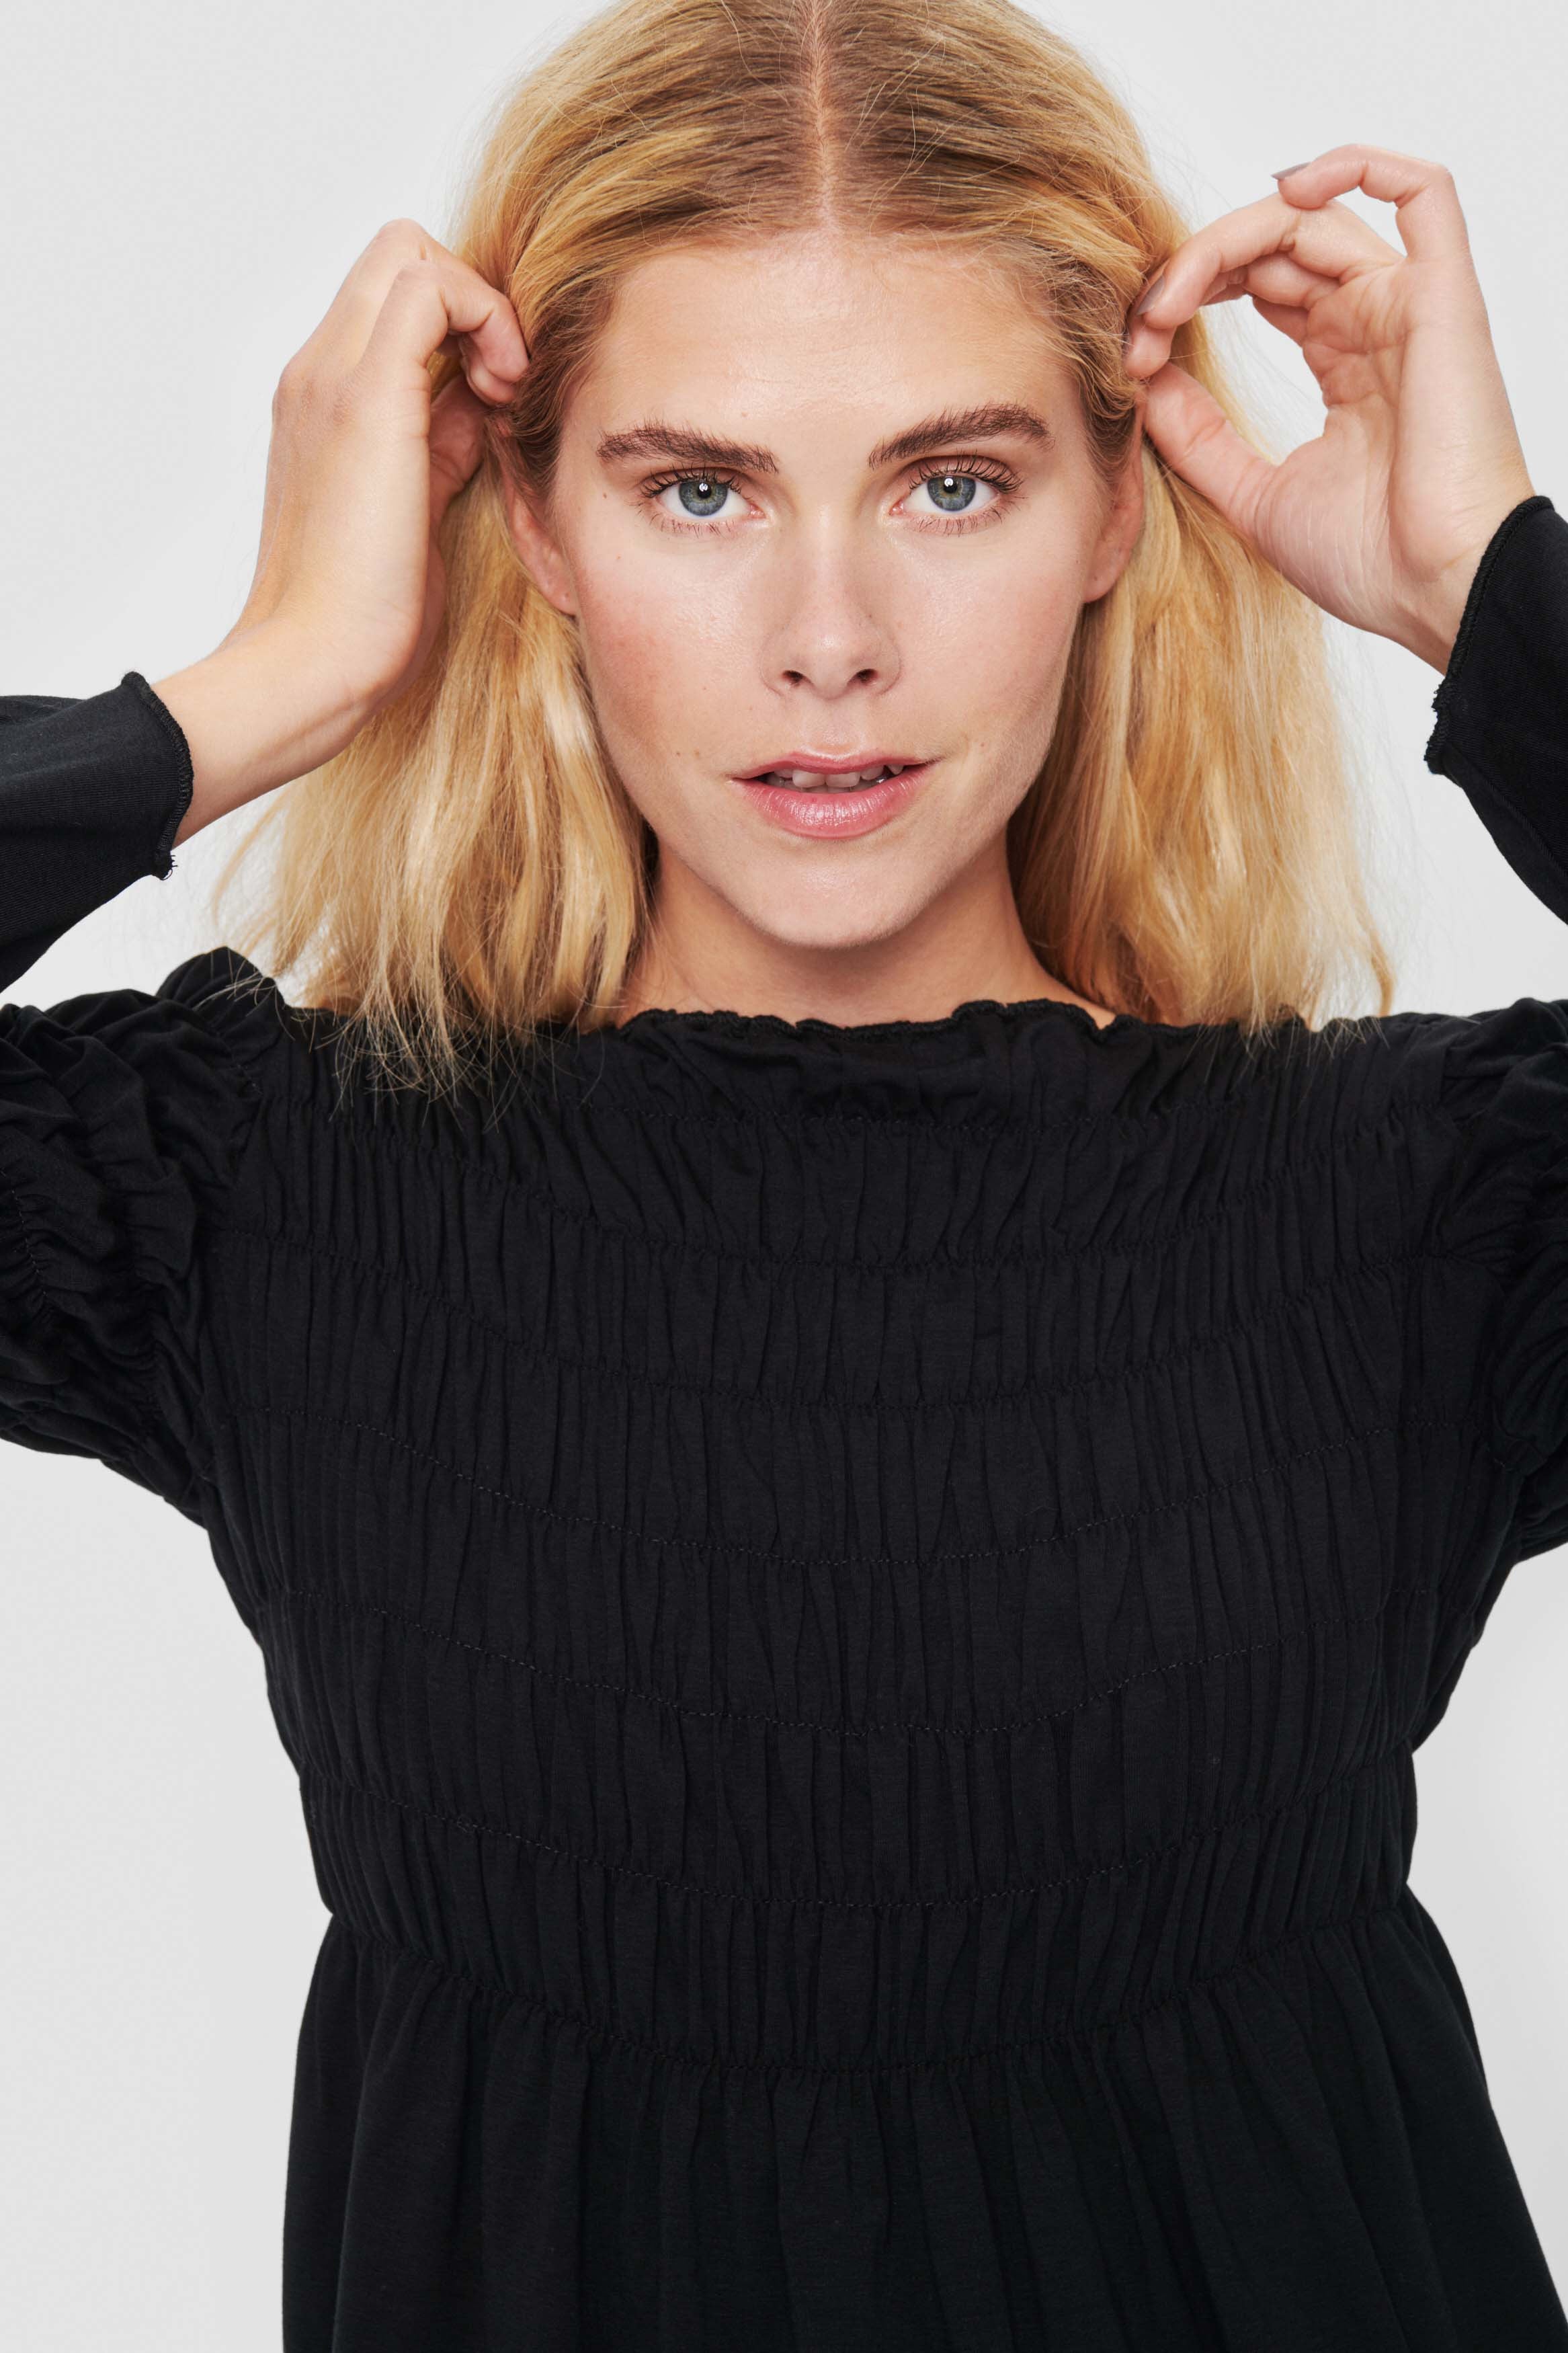 front top half view of a woman wearing the bitte kai rand atlas blouse in black. This blouse features a stitched gathering (smocking) on the top half of the top and sleeves that causes a peplum-like flare out from the waist and elbows.